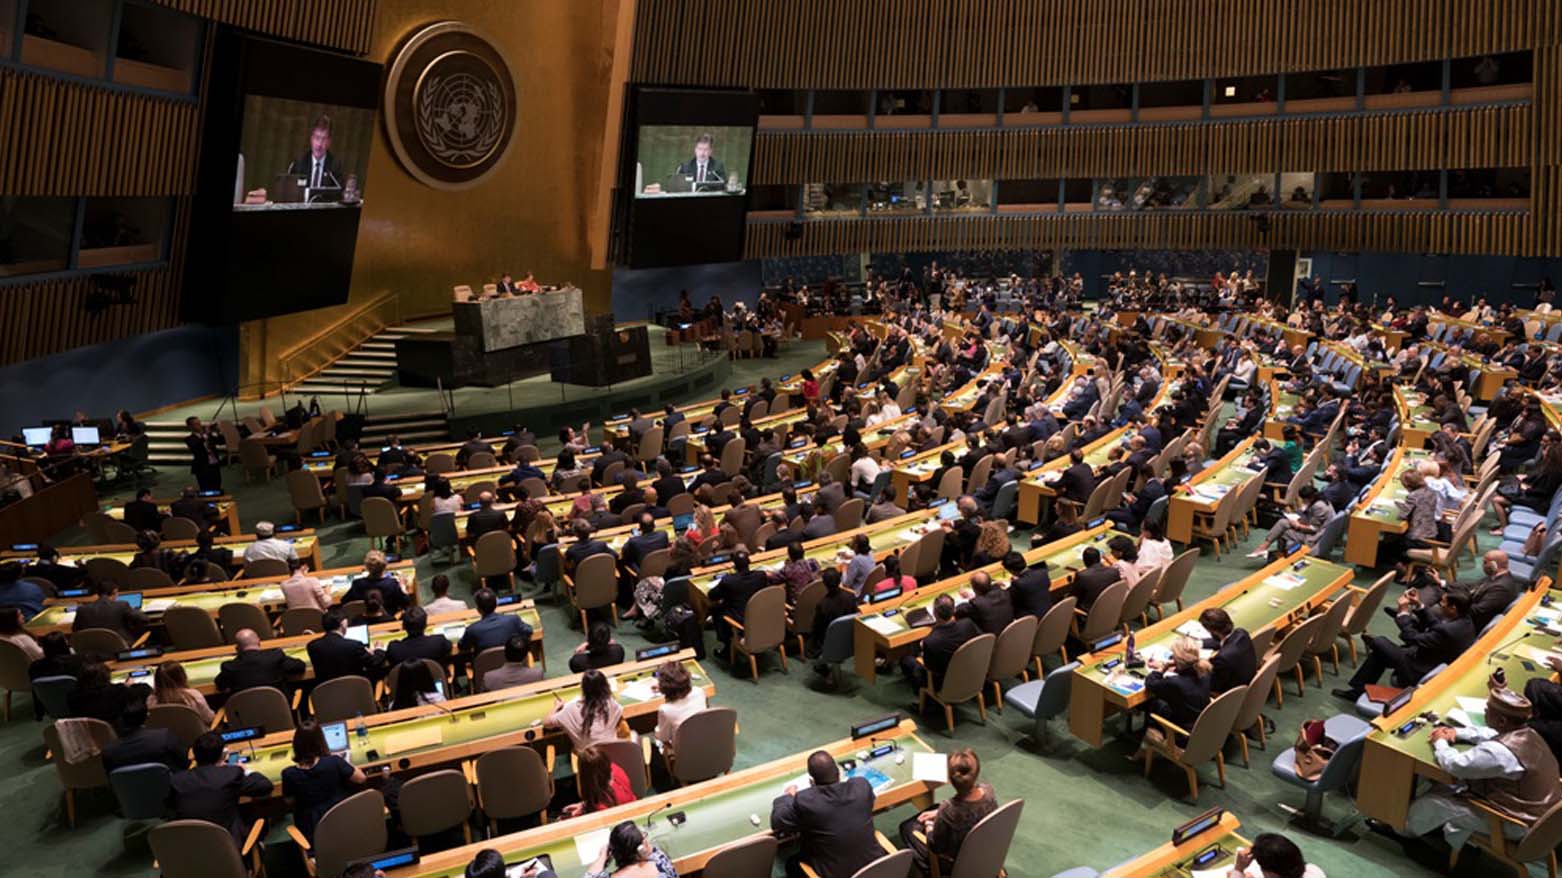 A UN General Assembly is pictured during a session. (Photo: Don Emmert/AFP)